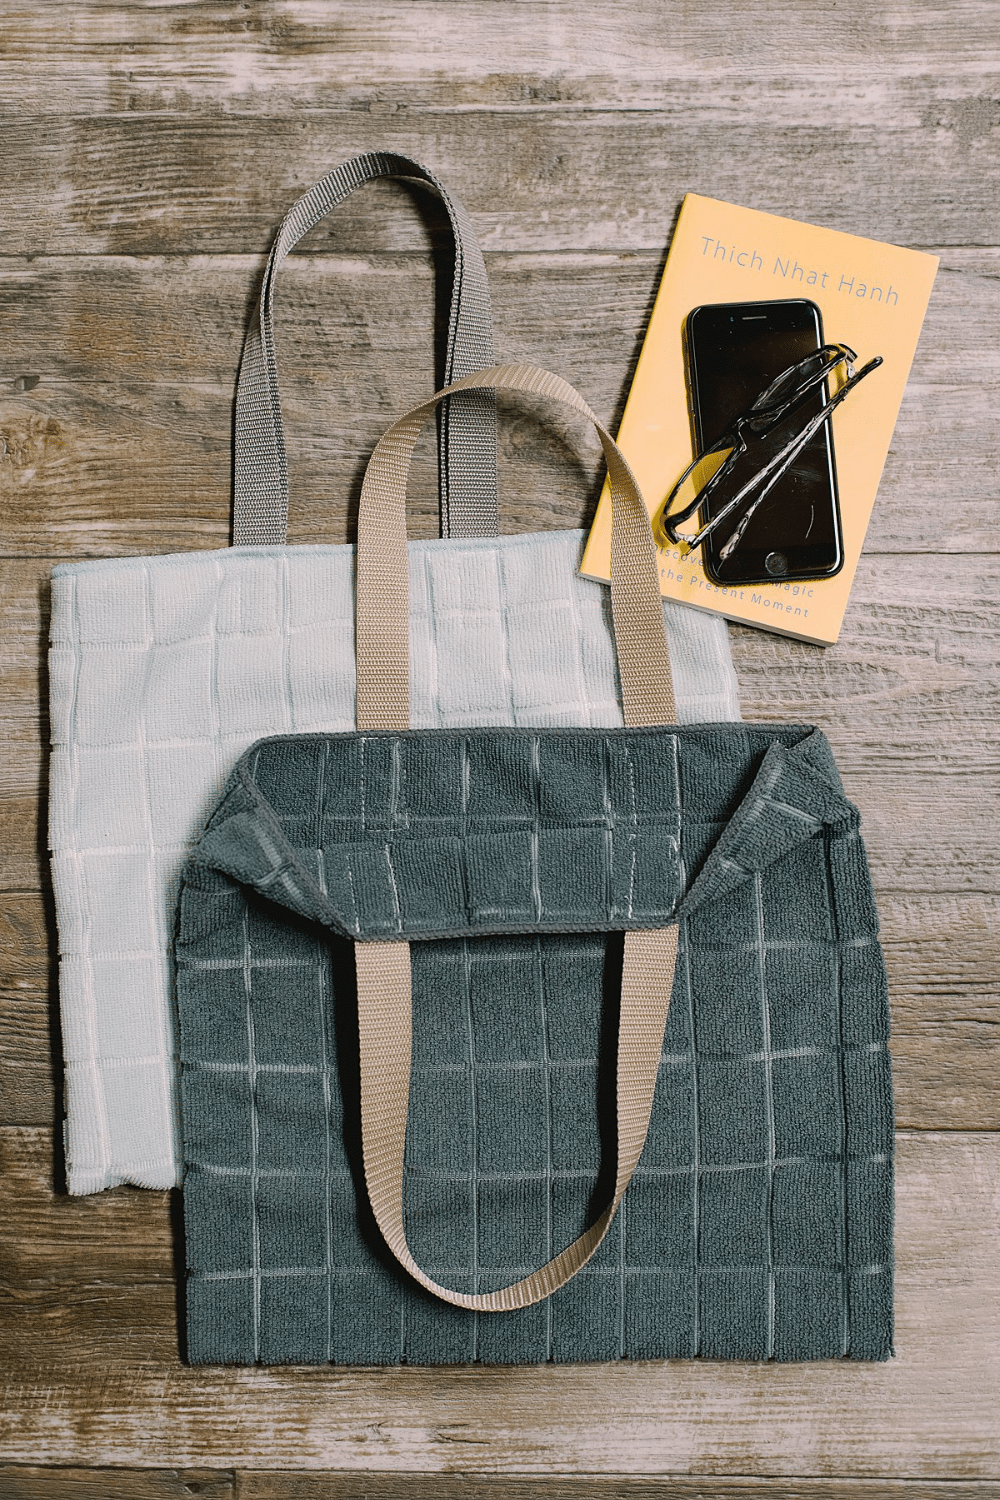 How to Make Tote Bags from Hand Towels